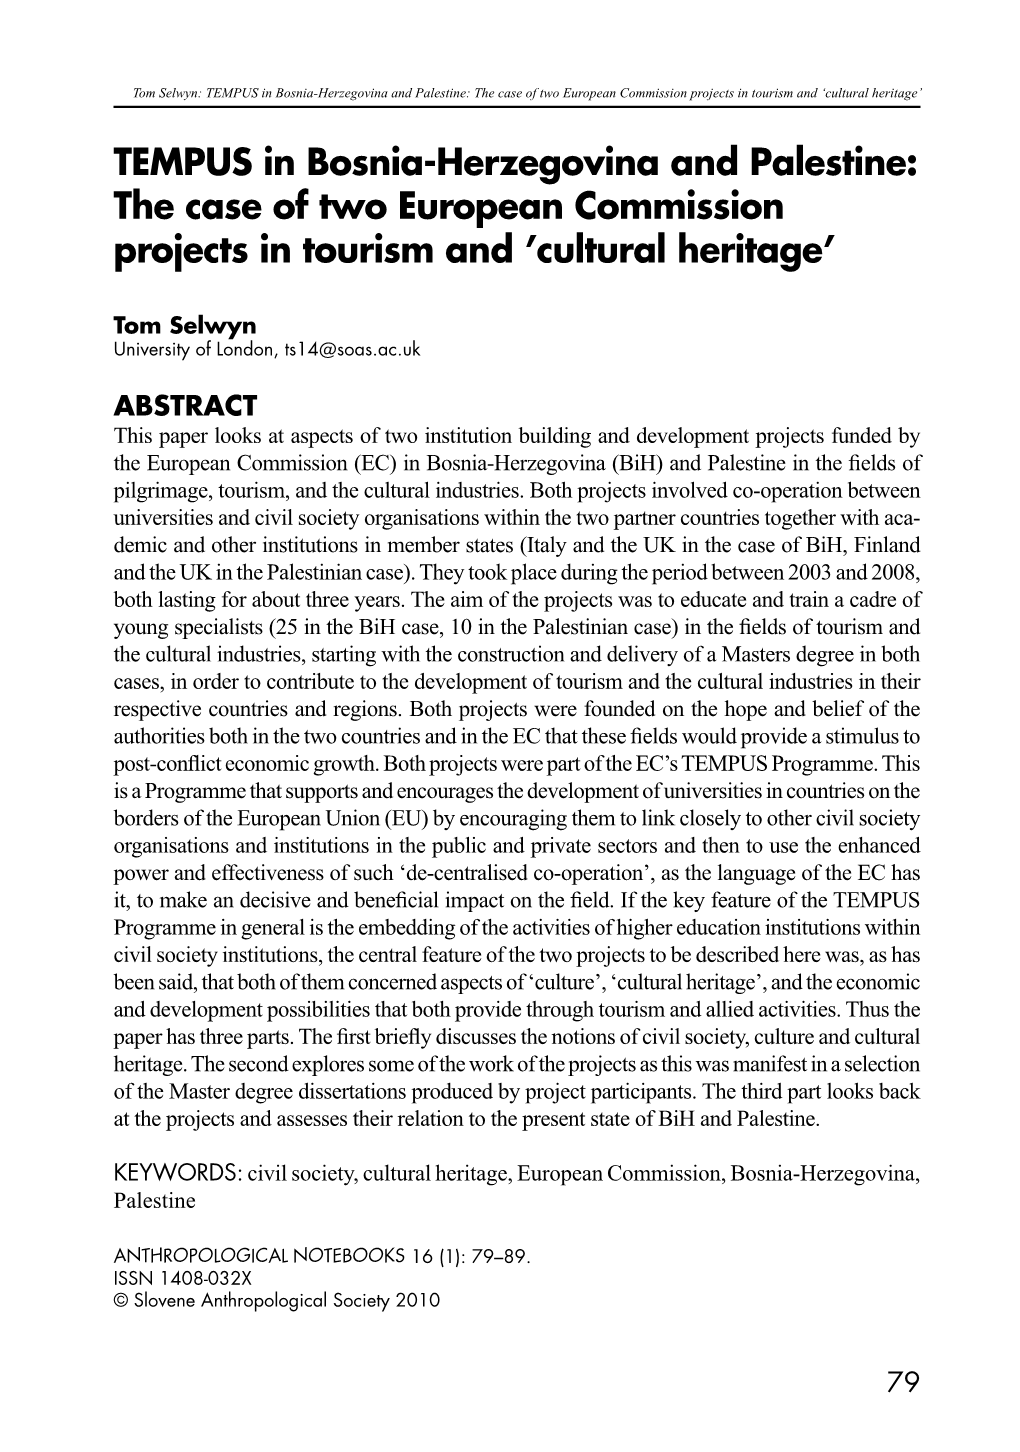 The Case of Two European Commission Projects in Tourism and ‘Cultural Heritage’